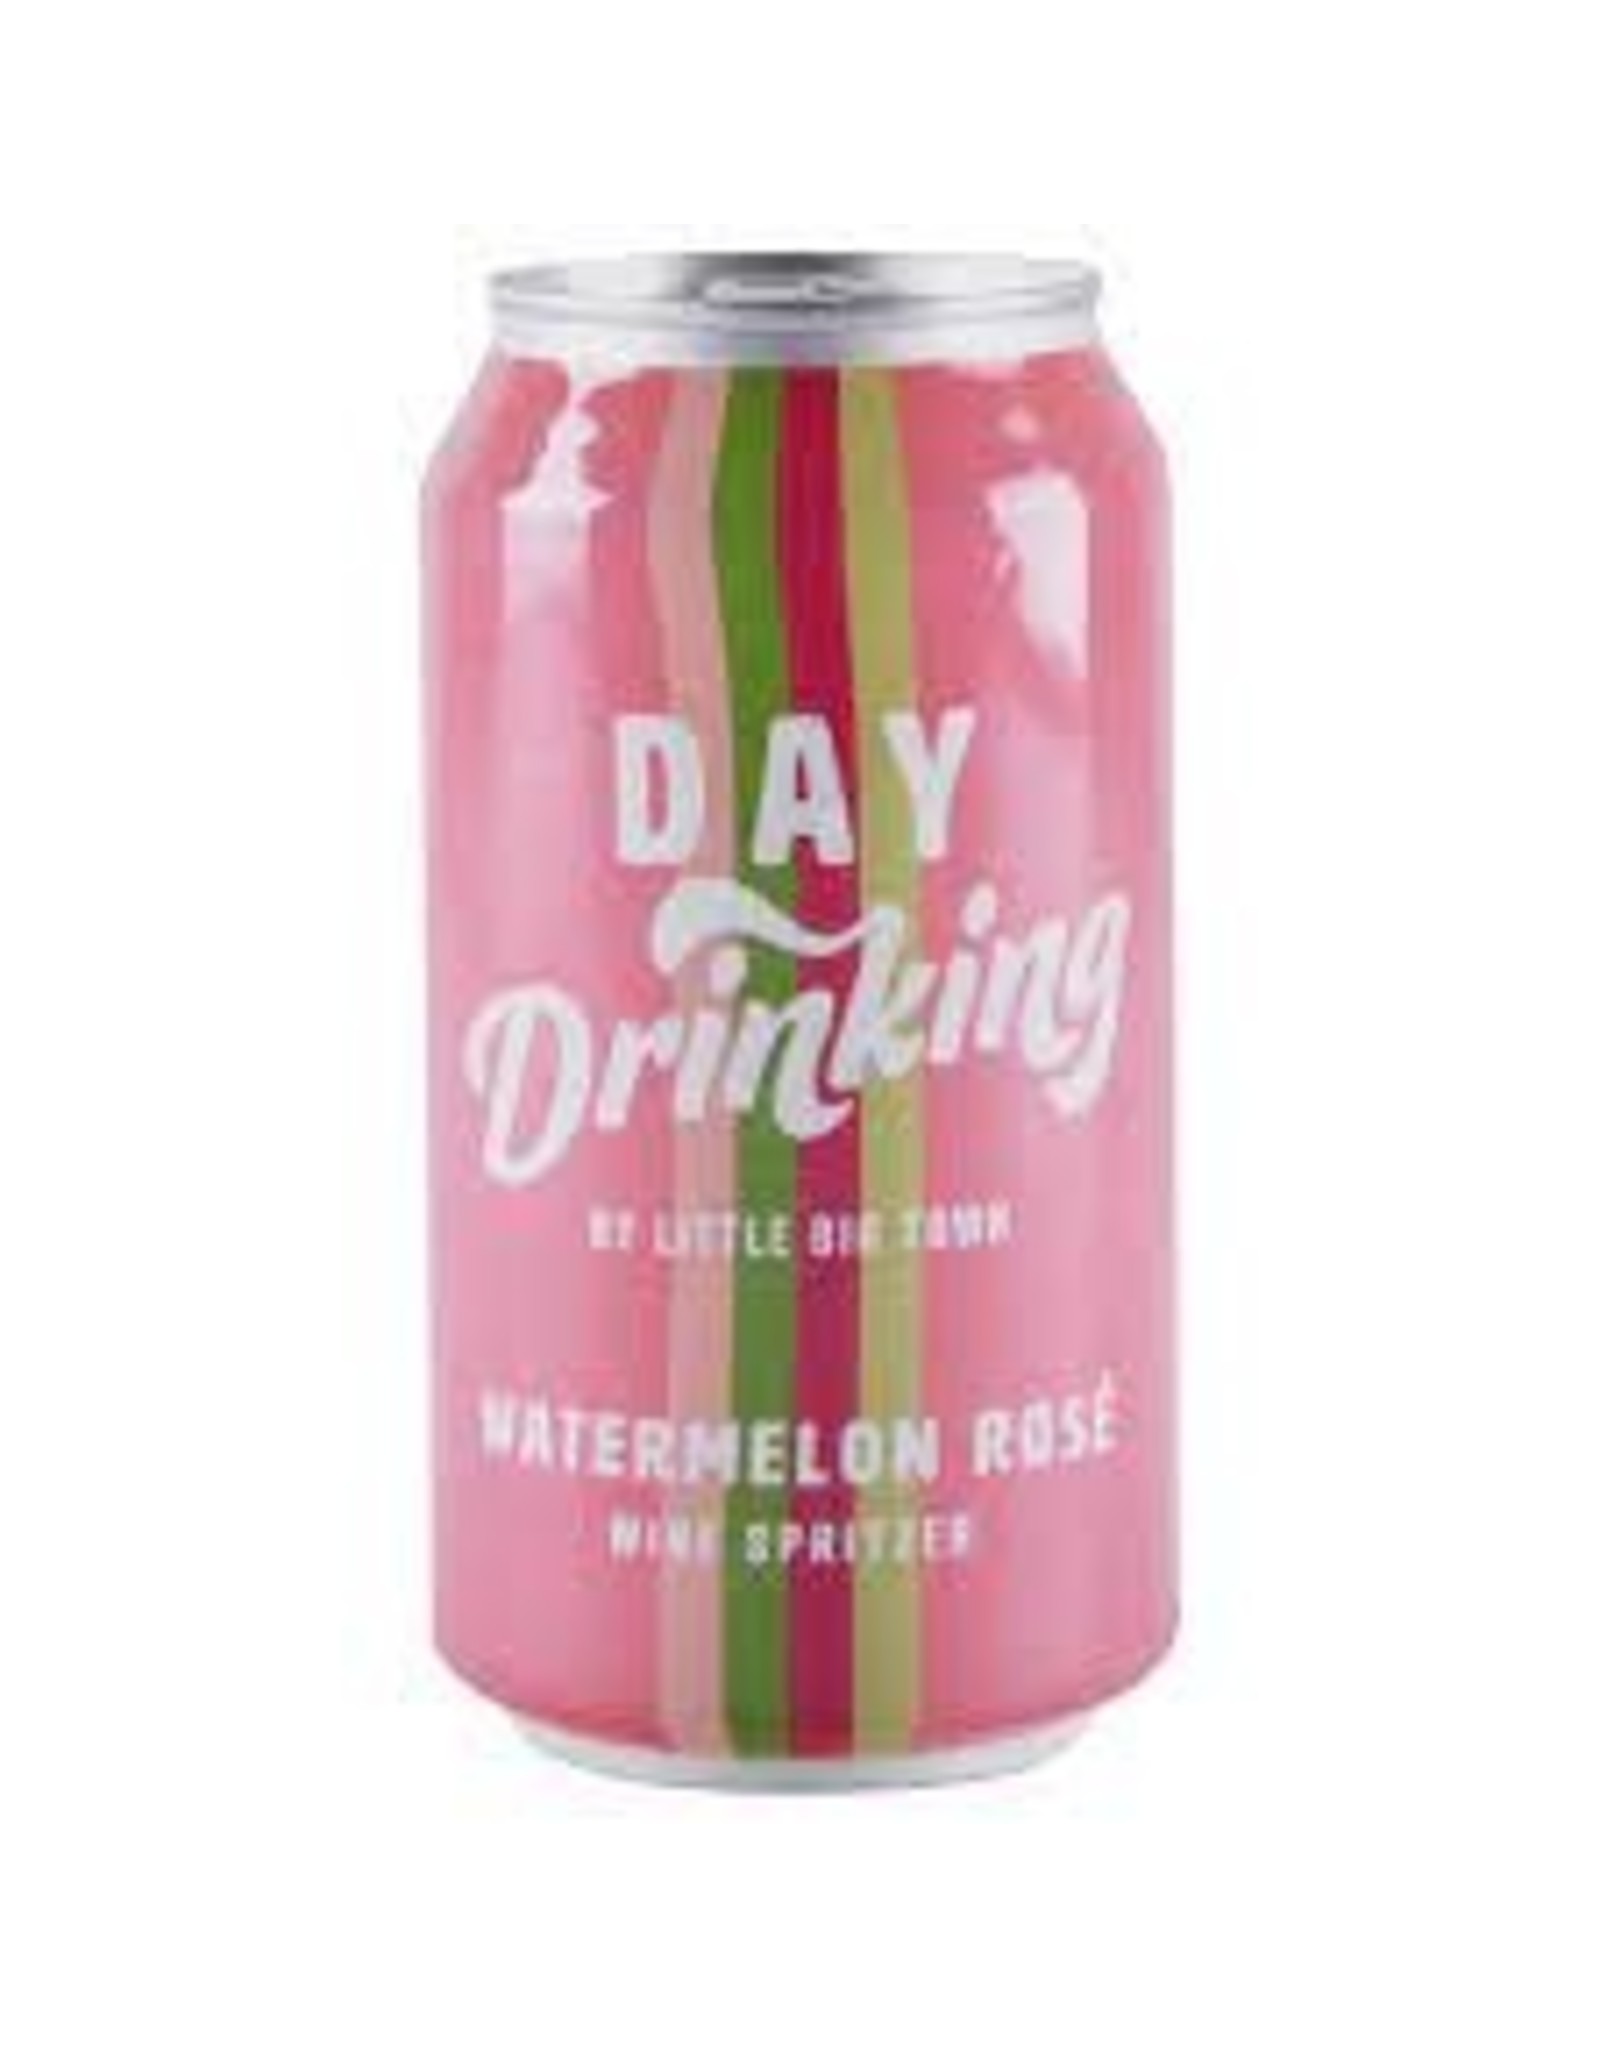 DAY DRINKING WATERMELON ROSE 12OZ CAN